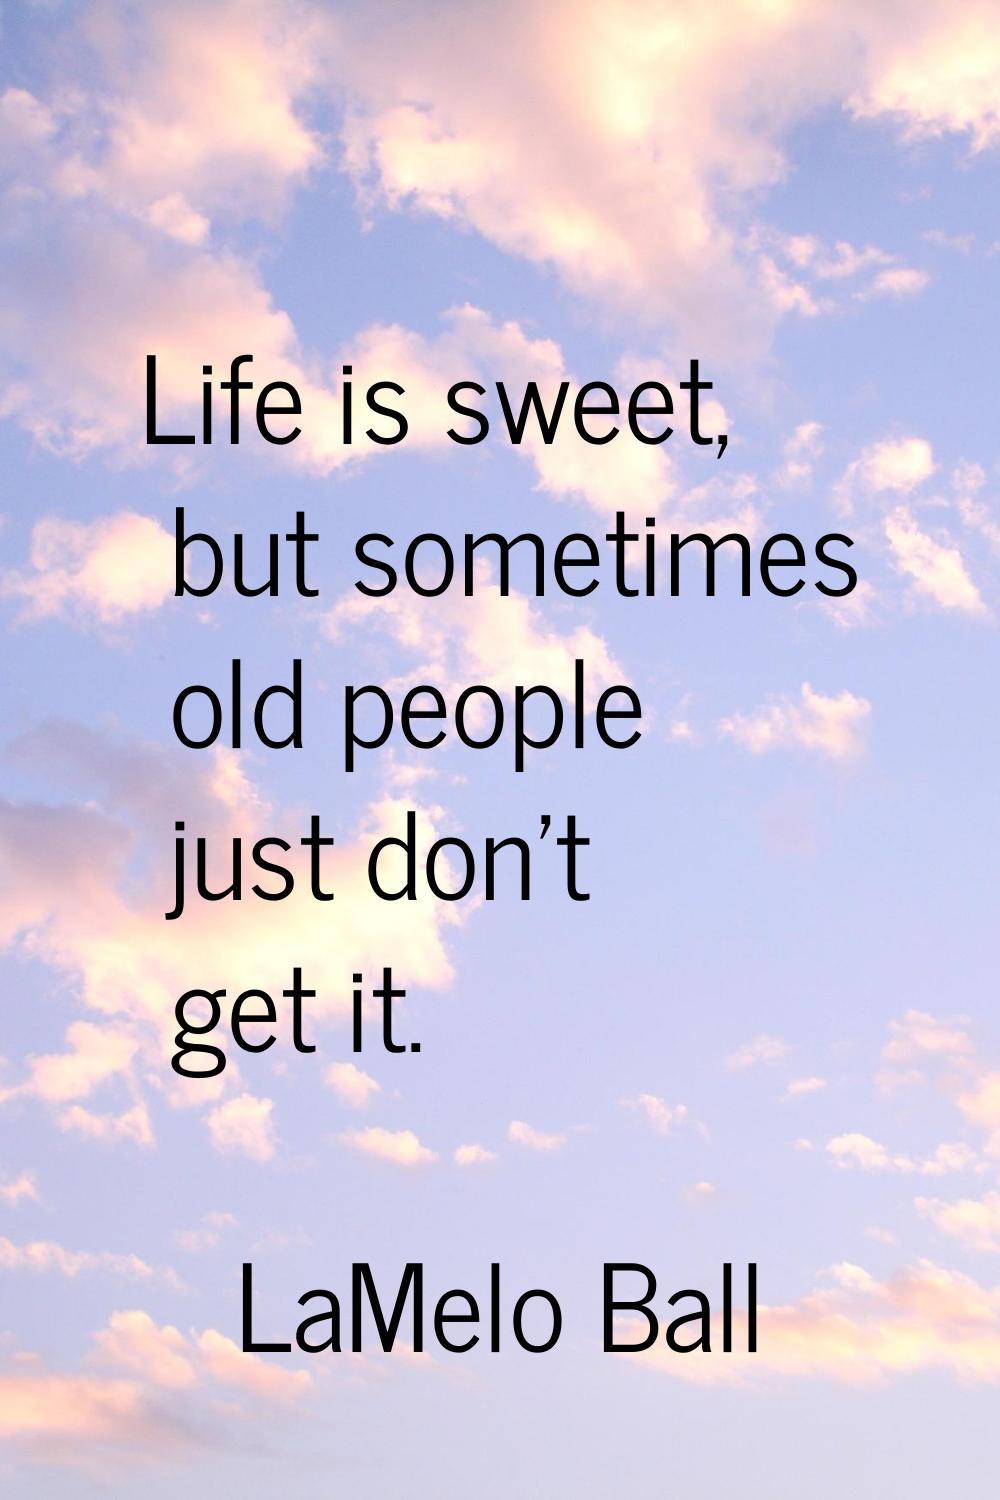 Life is sweet, but sometimes old people just don't get it.